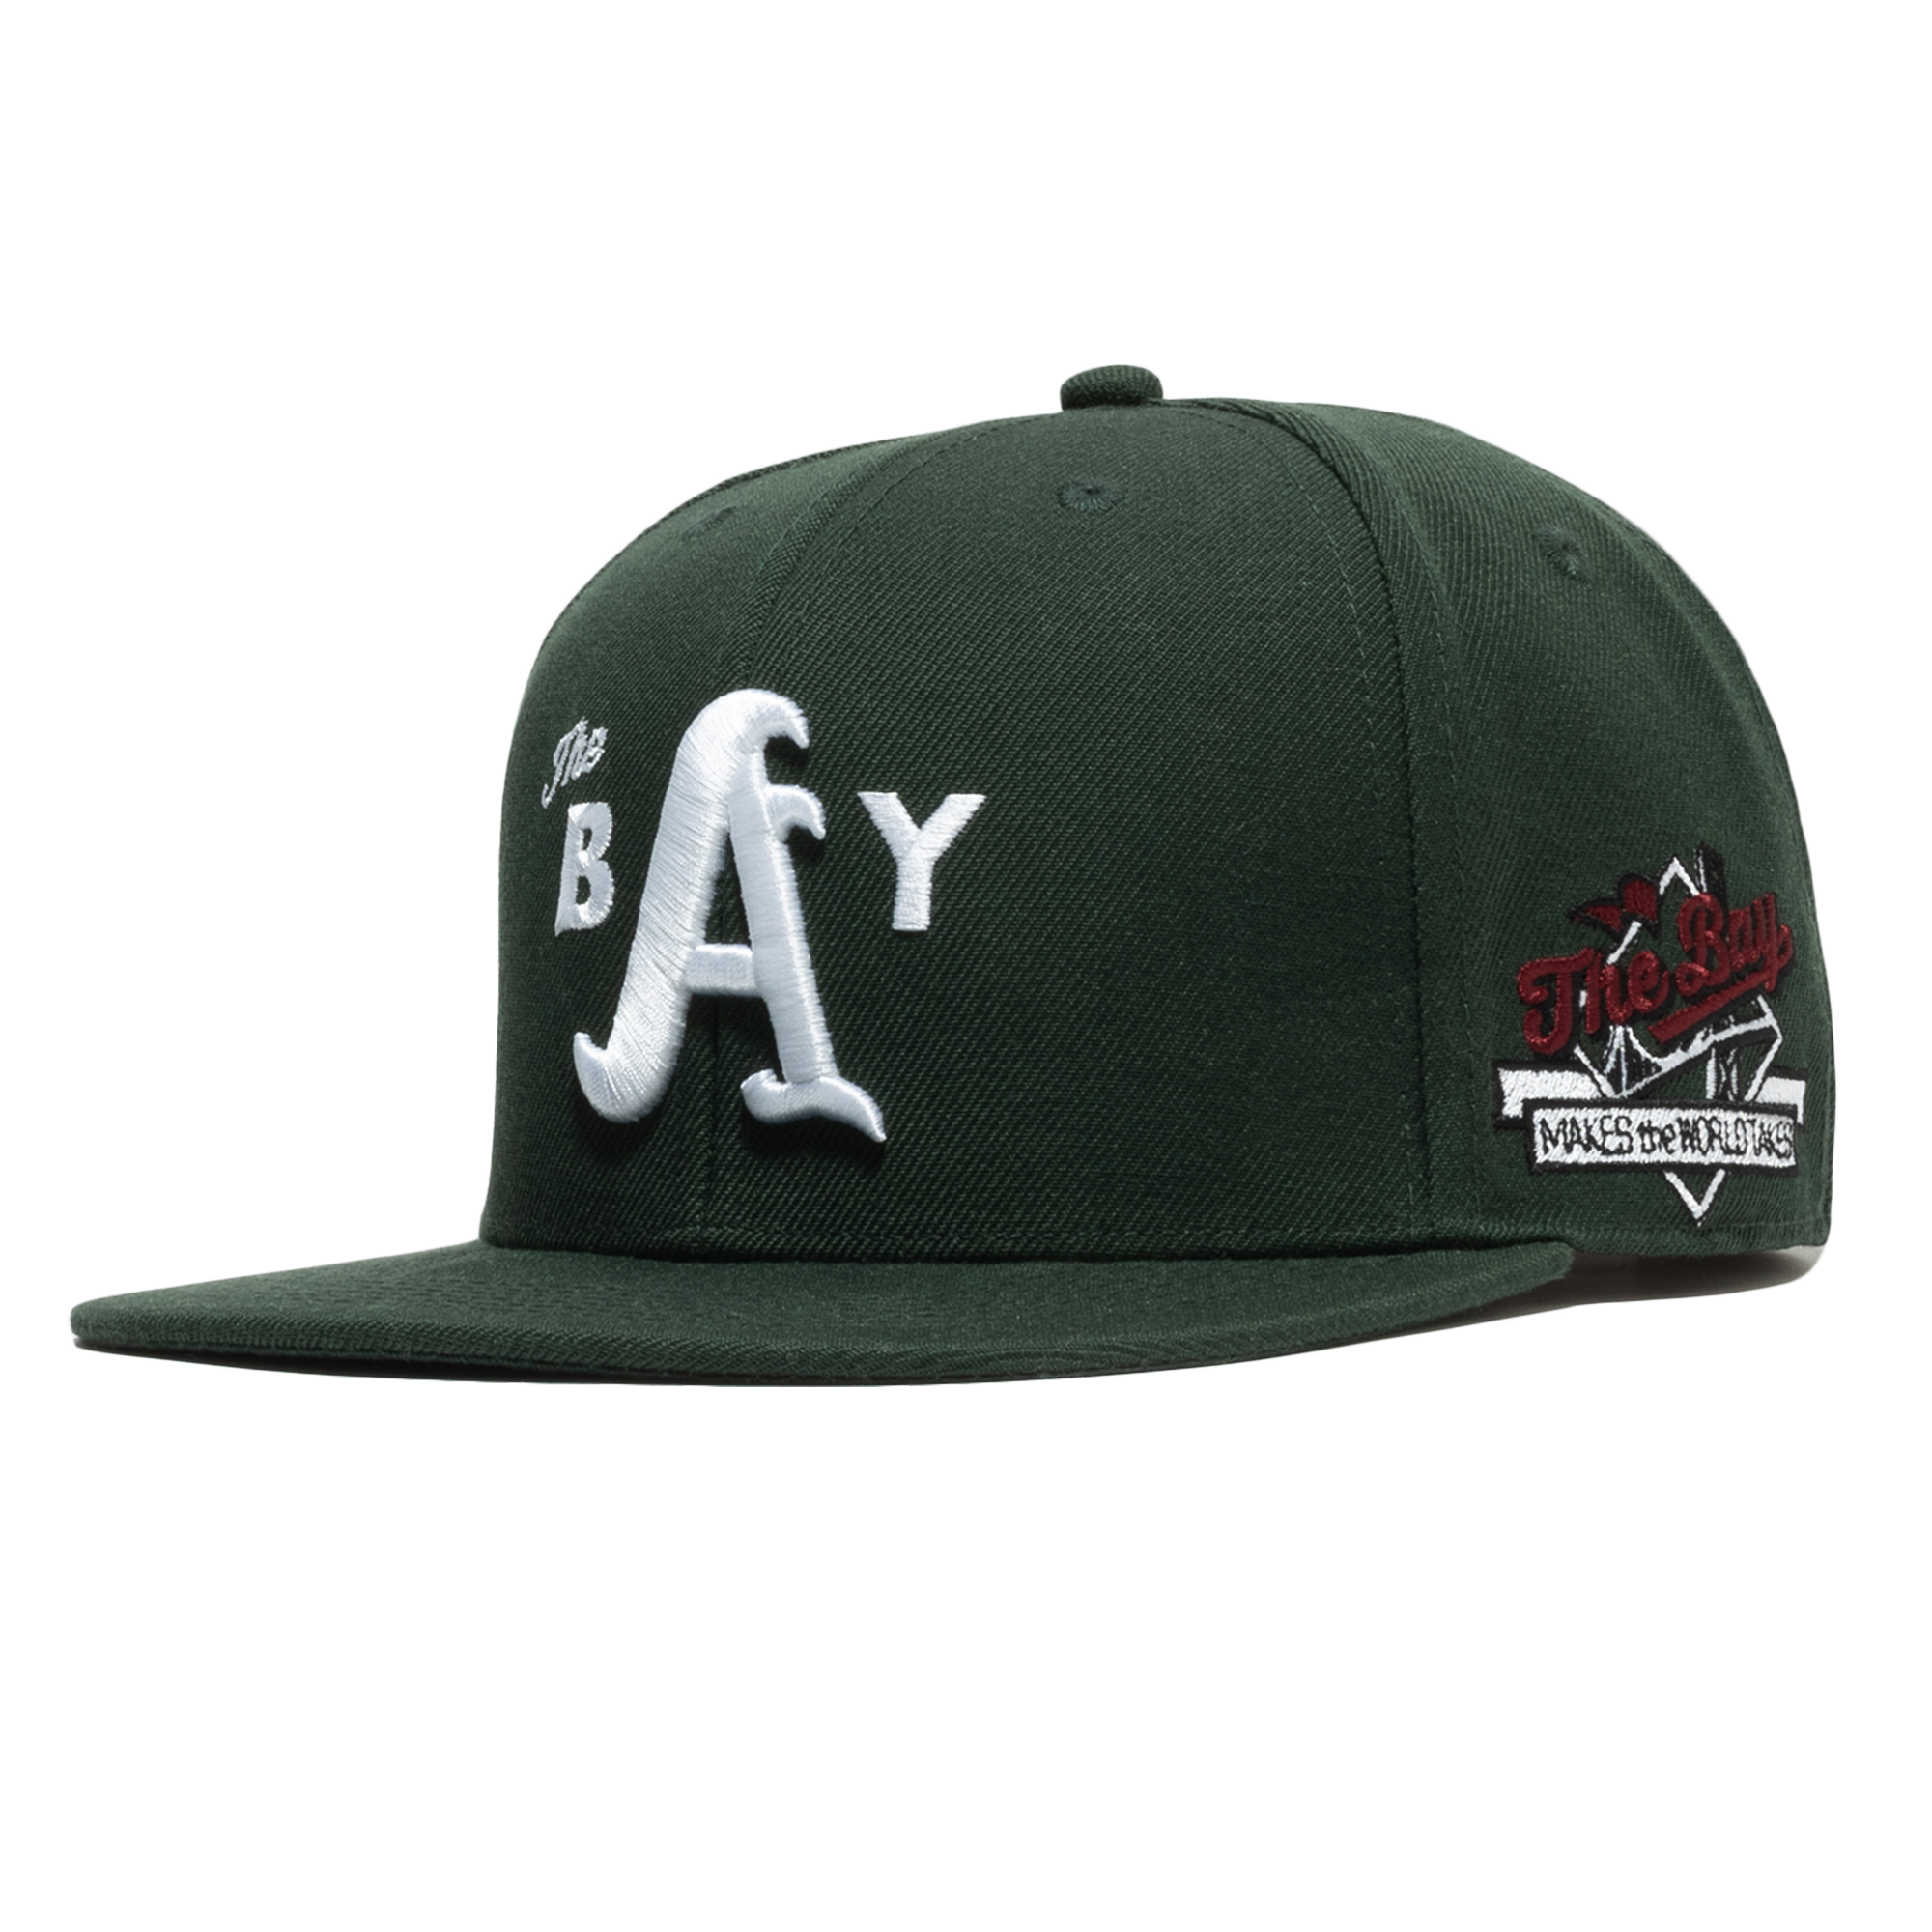 The Bay Snapback by DOC